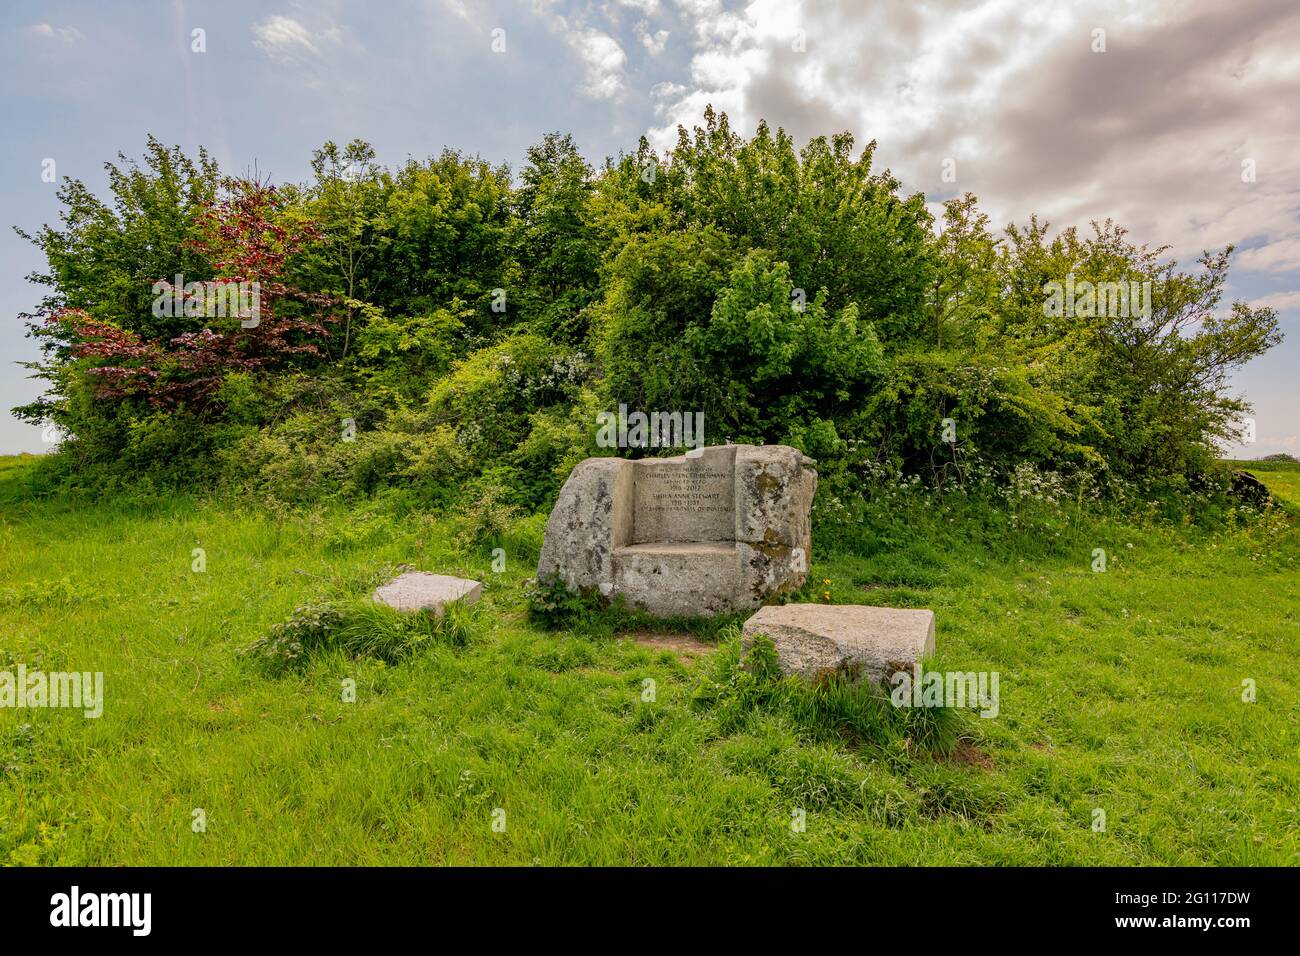 Stone seats in memory of Charles Spencer Denman & Shelia Anne Stewart - 5th Baron & Baroness of Dovedale - situated just off the South Downs Way. Stock Photo